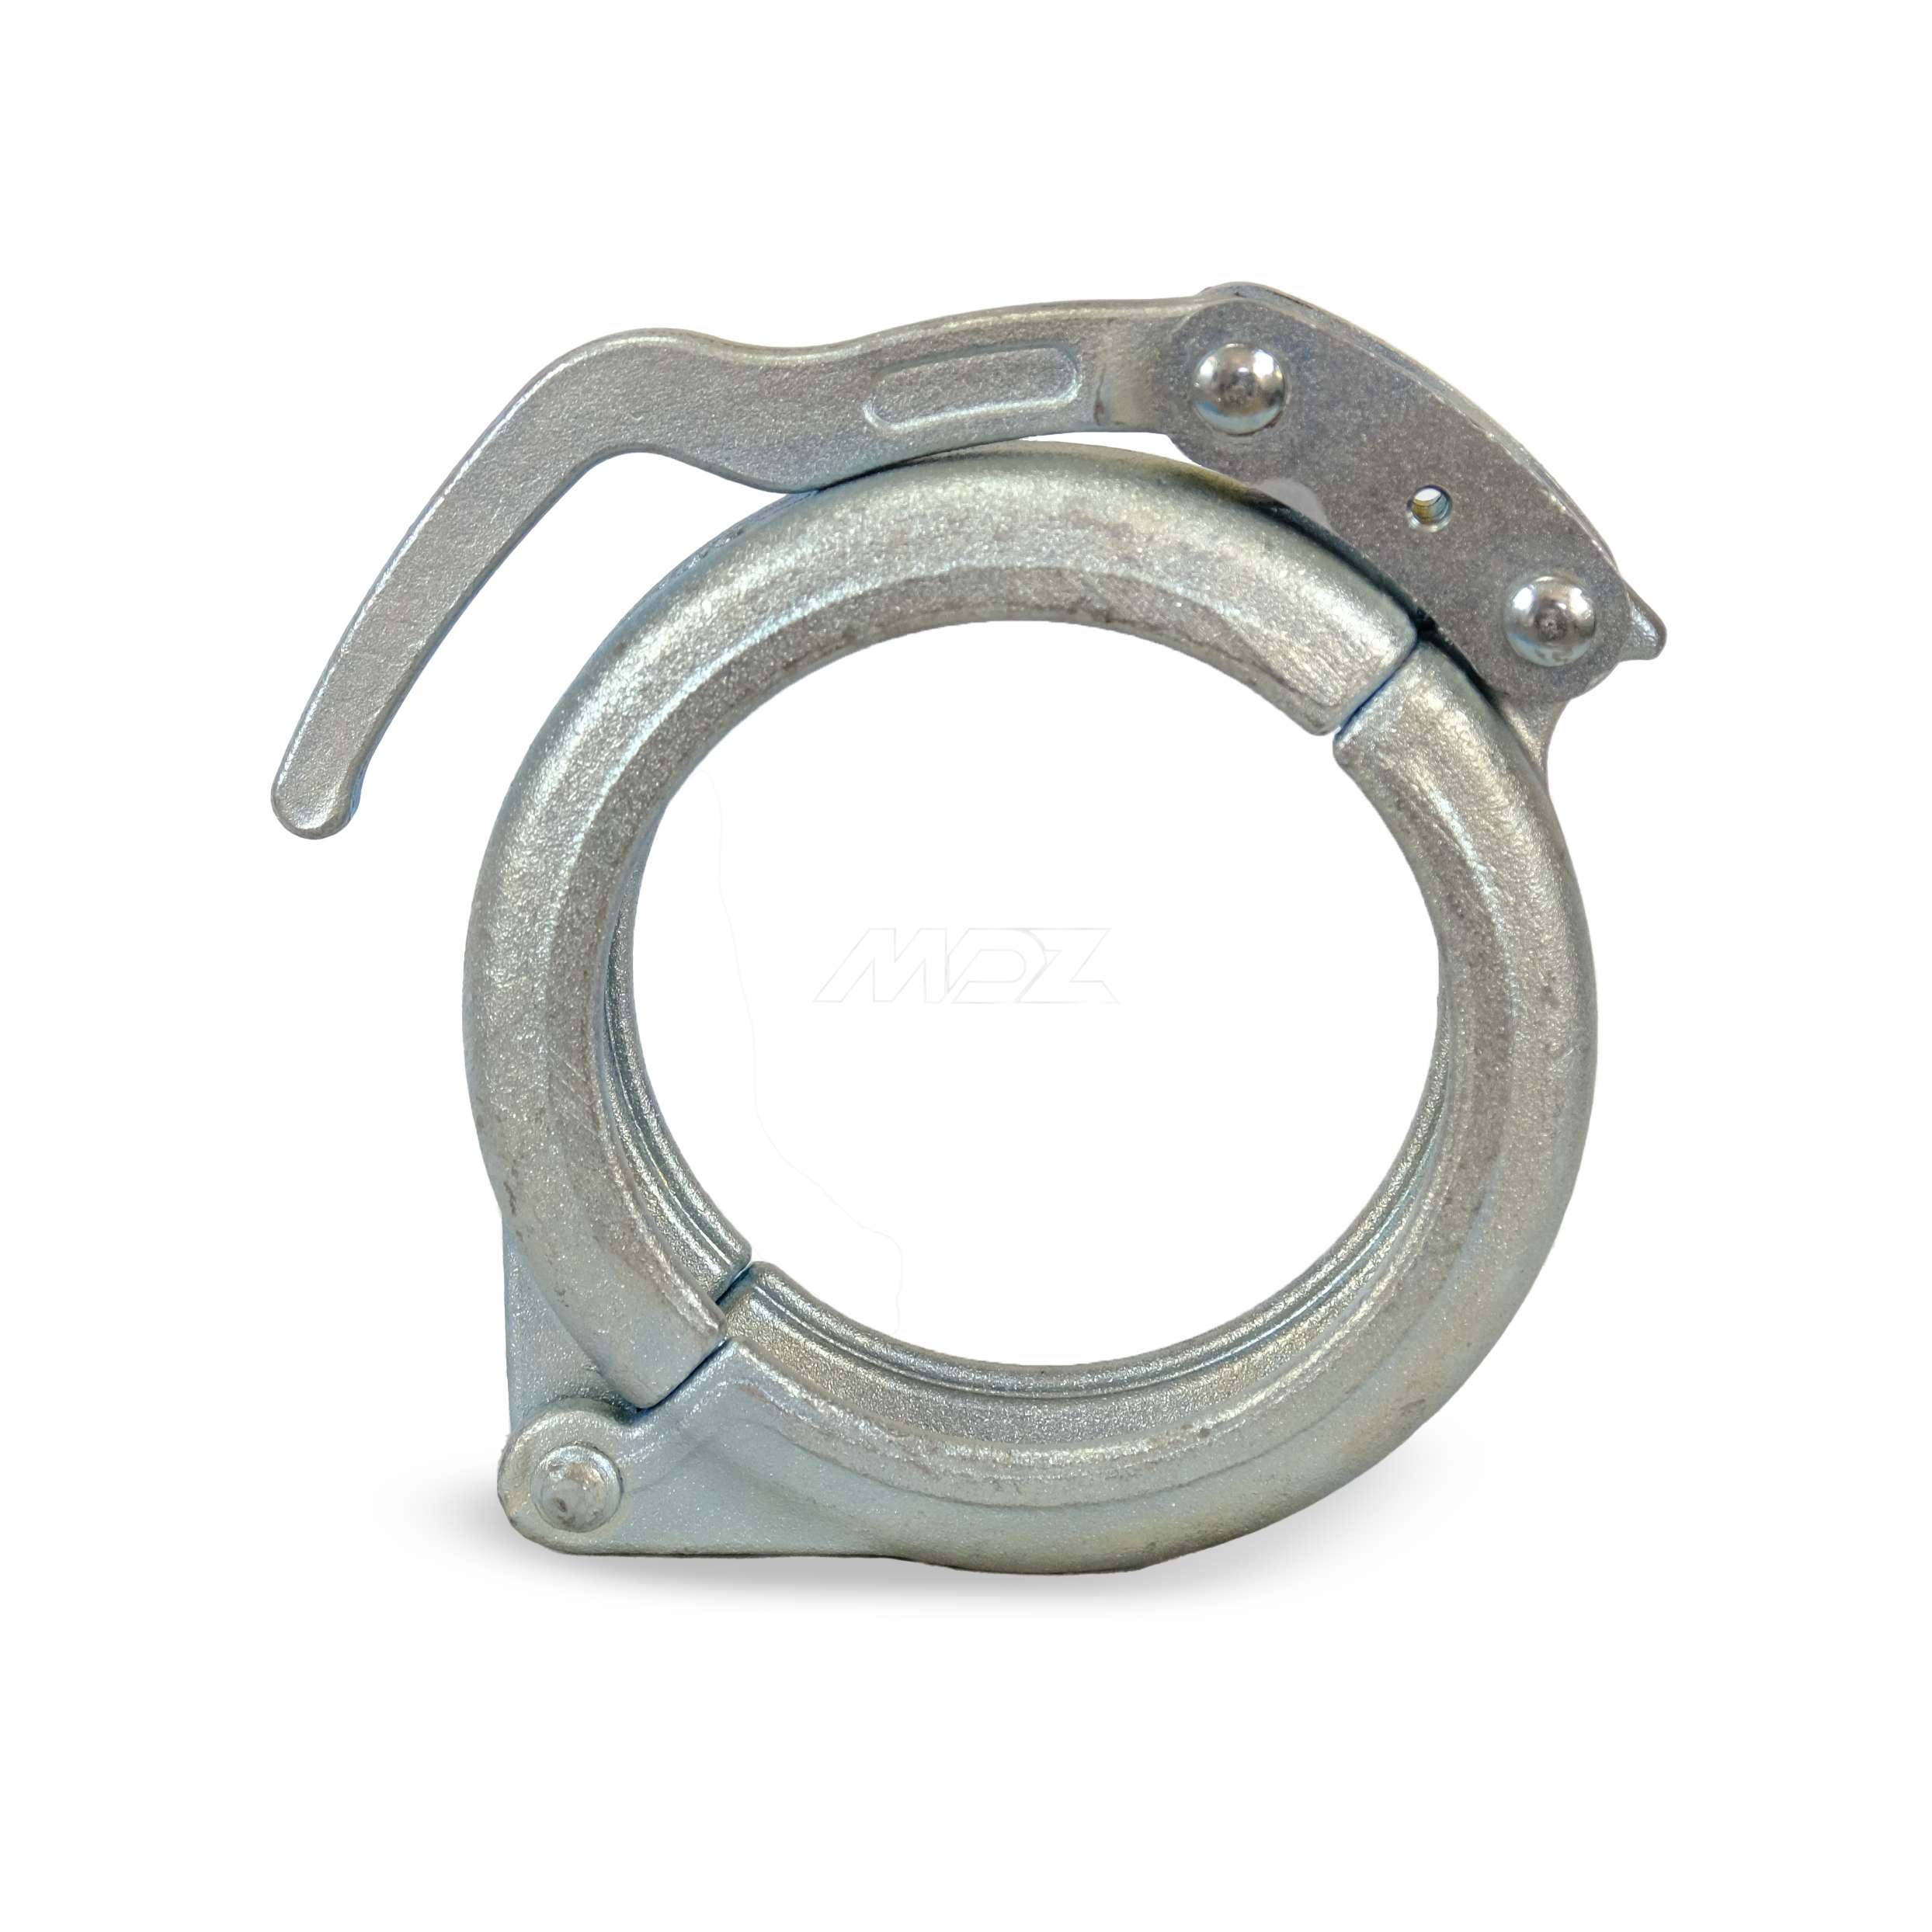 Cup Type Clamp 5.5”